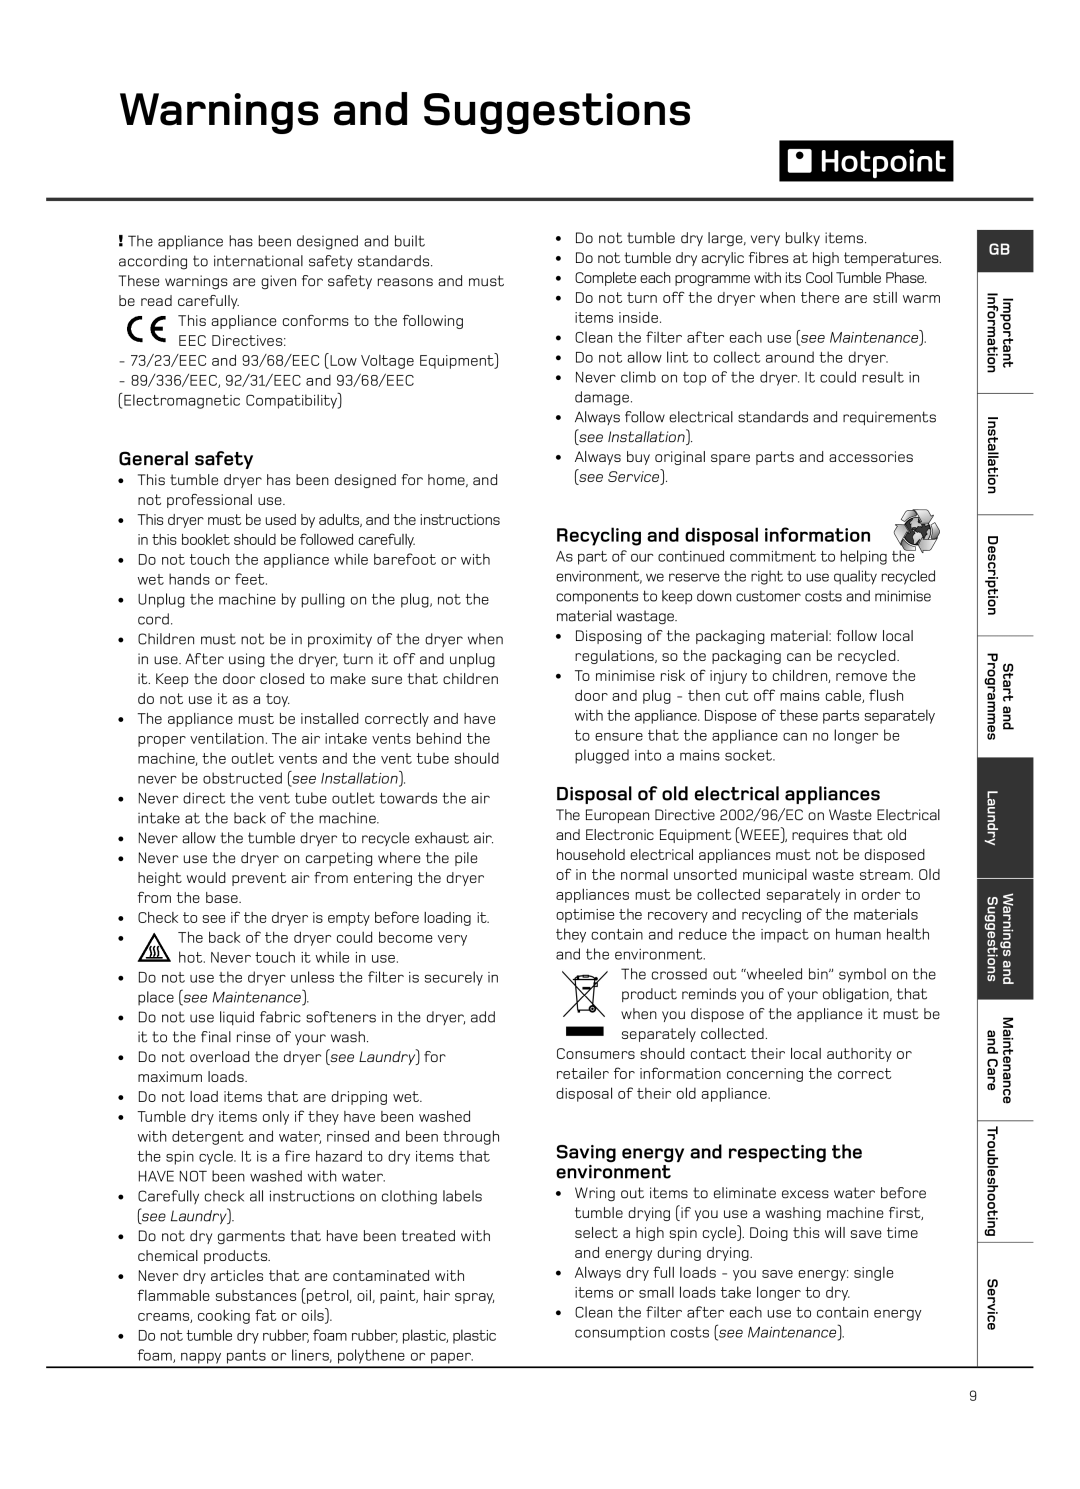 Hotpoint VTD00, VTD20 manual General safety, Recycling and disposal information, Disposal of old electrical appliances 